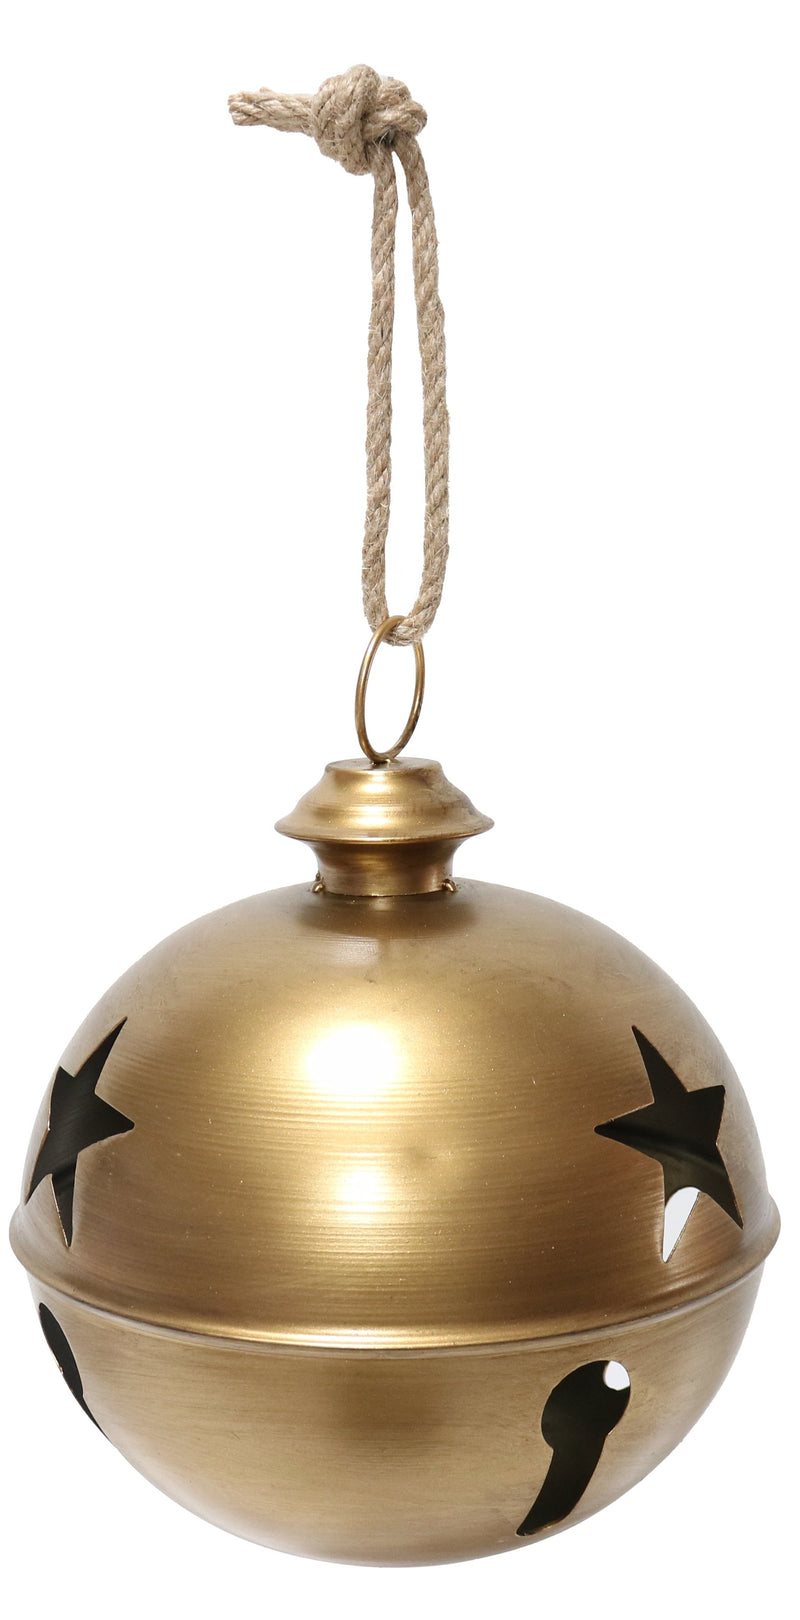 COMING SOON - ANTIQUE STARRY NUTBELL